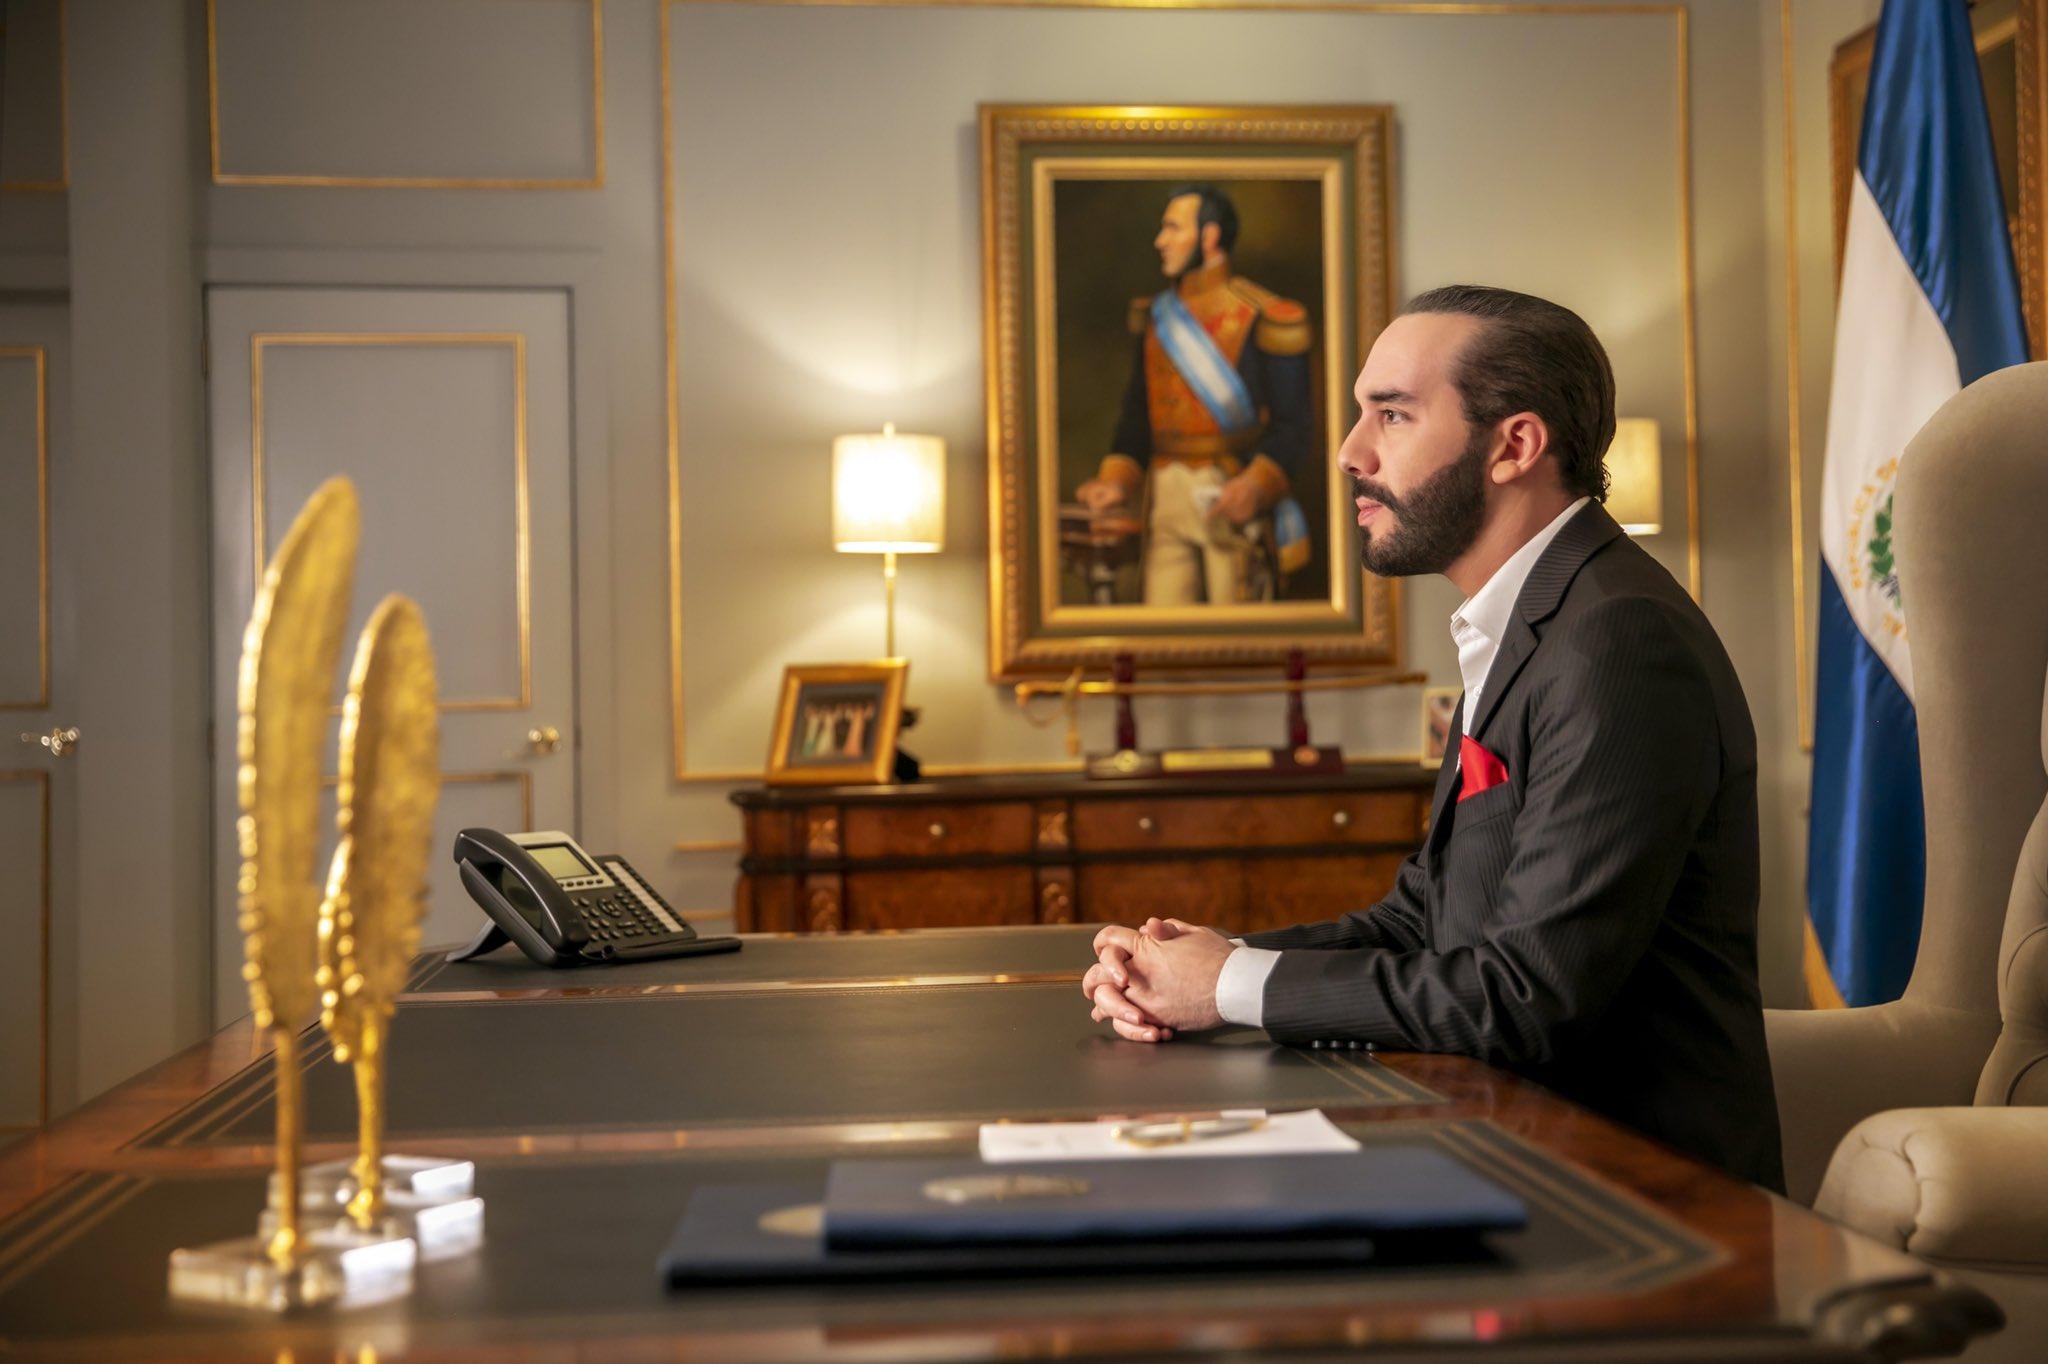 President Nayib Bukele addressed the U.N. General Assembly remotely on September 23, 2021. Photo: Casa Presidencial official Twitter account